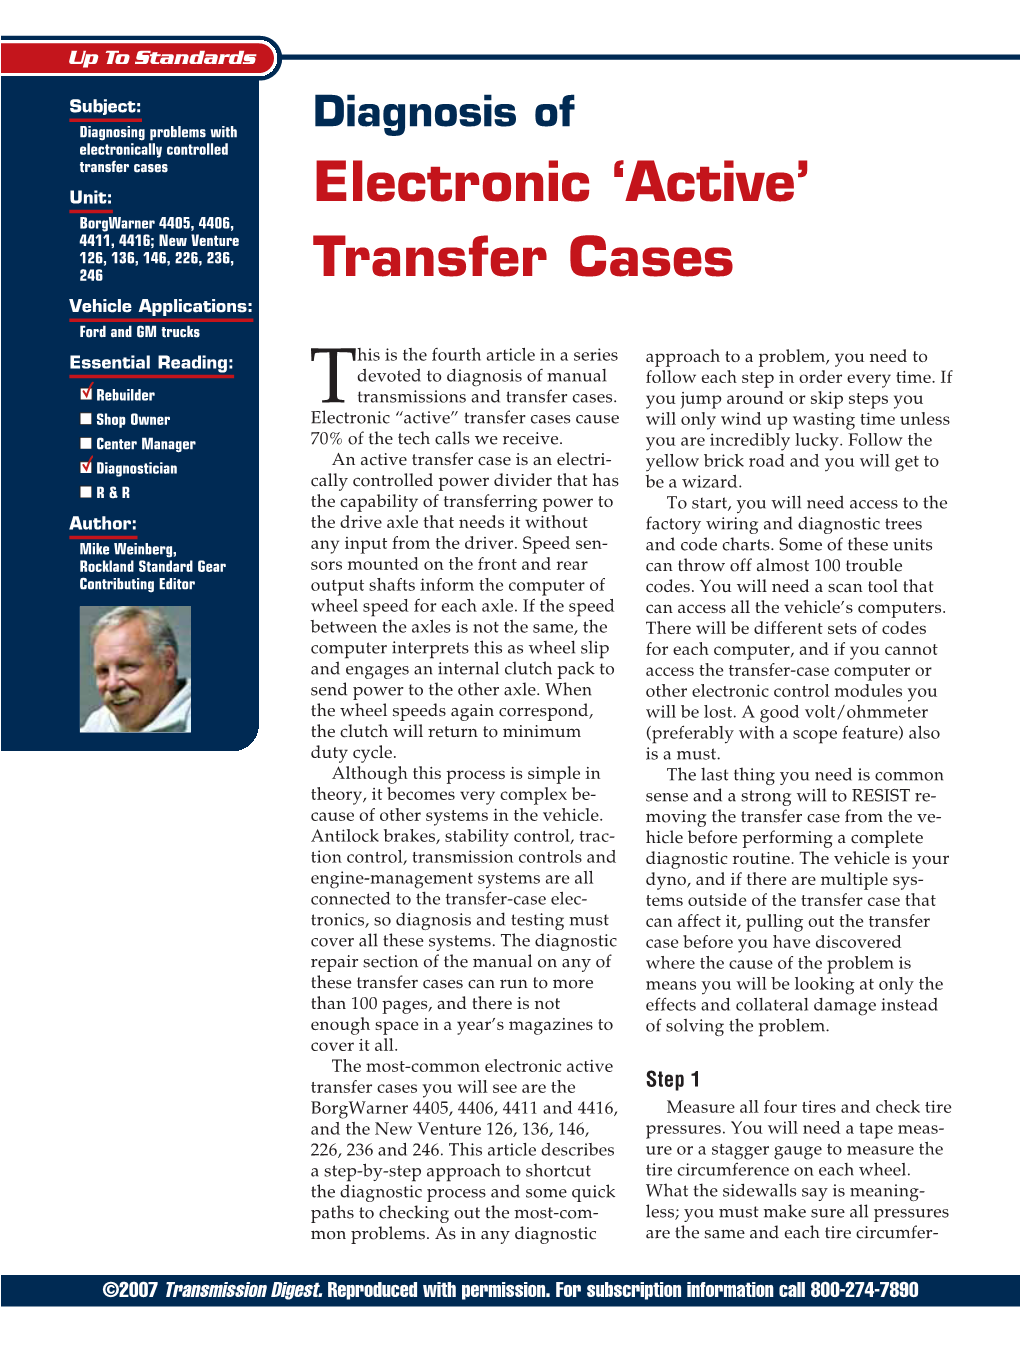 'Active' Transfer Cases